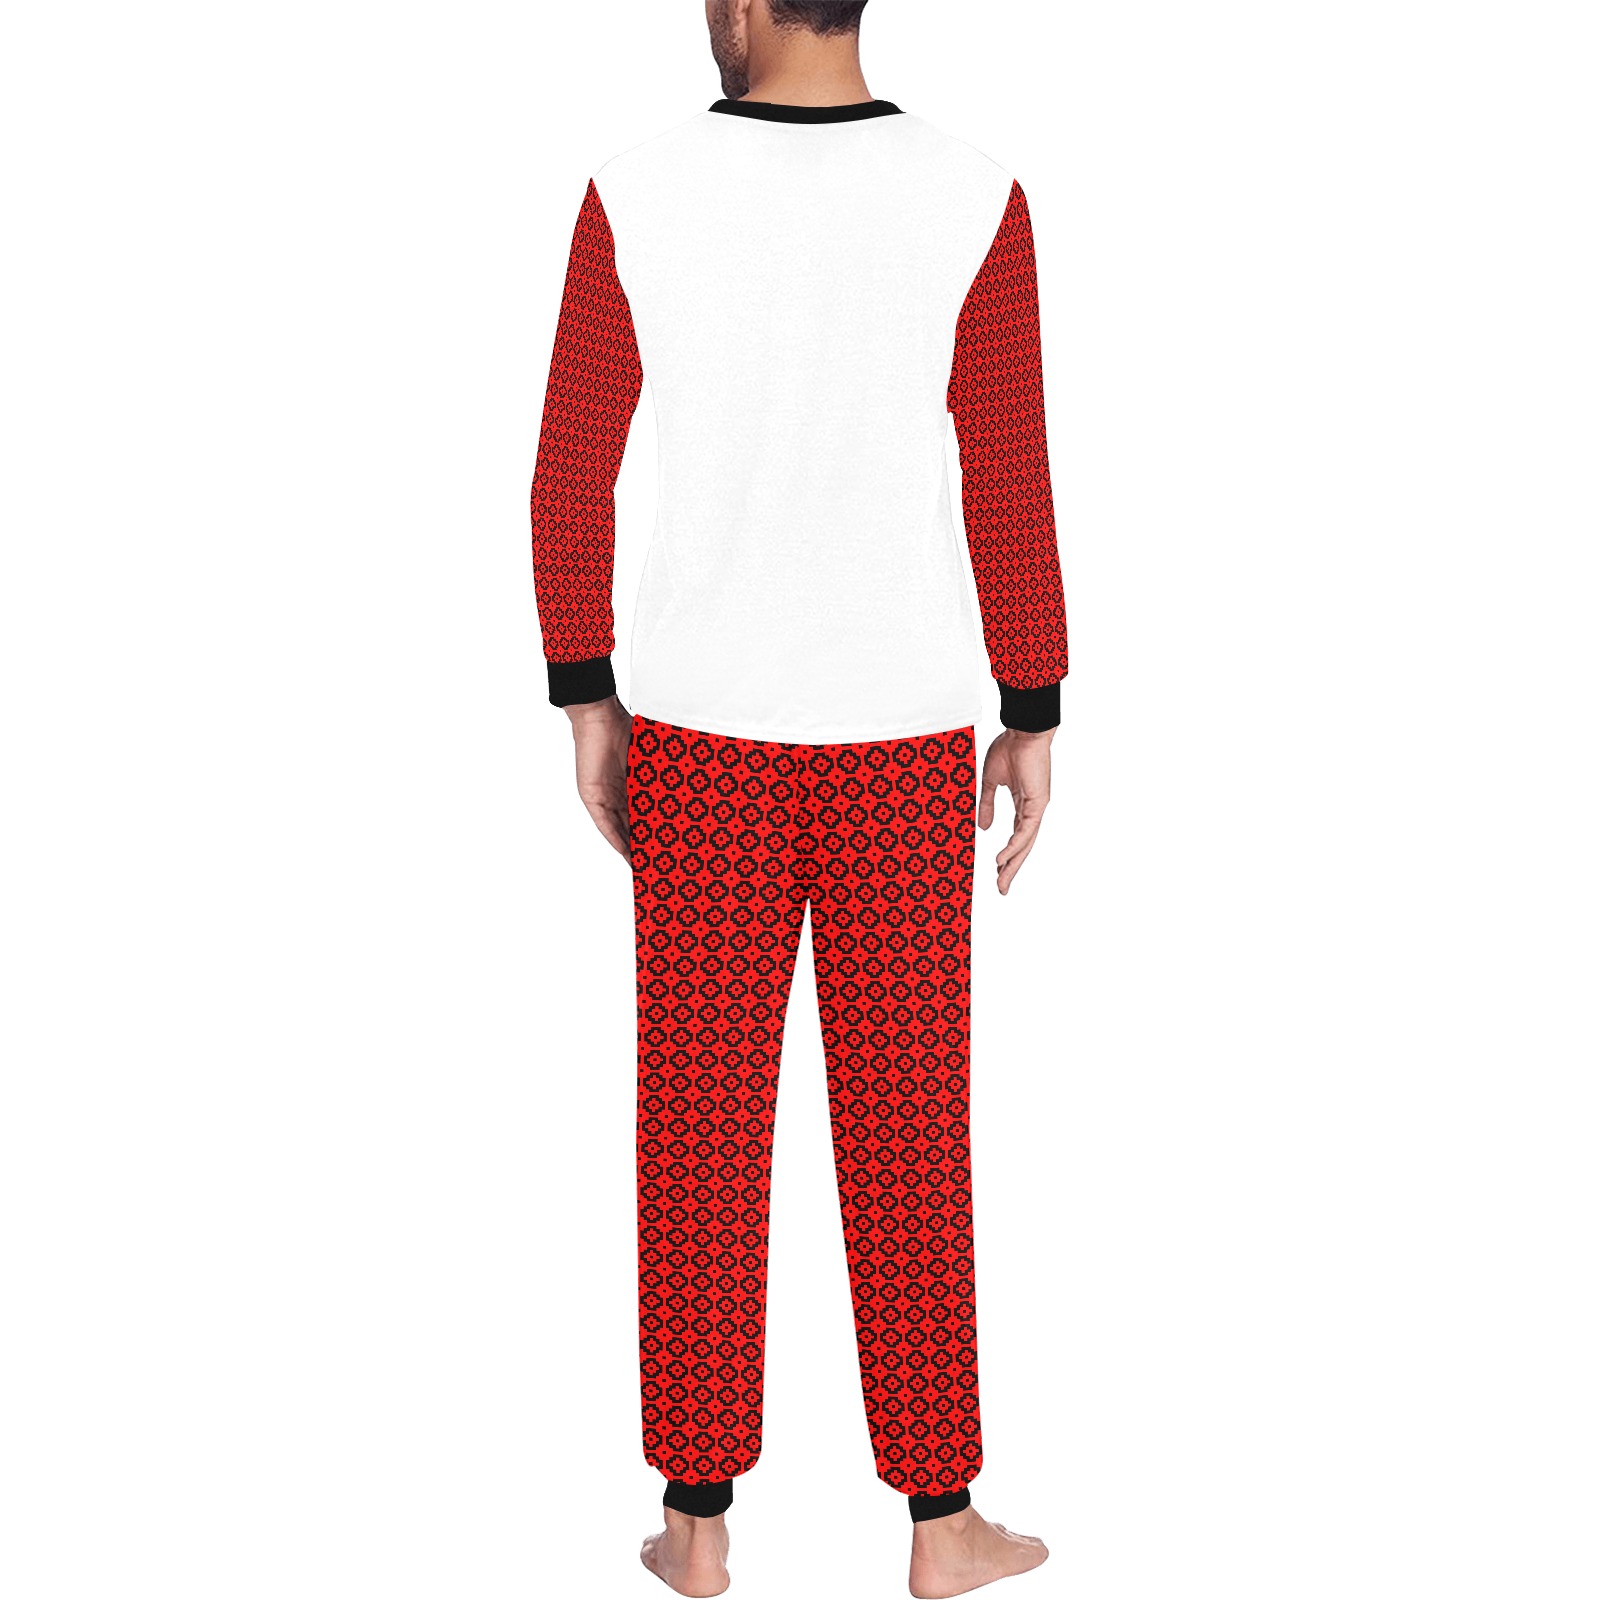 Most Likely to Drank the Christmas Spirits Men's All Over Print Pajama Set